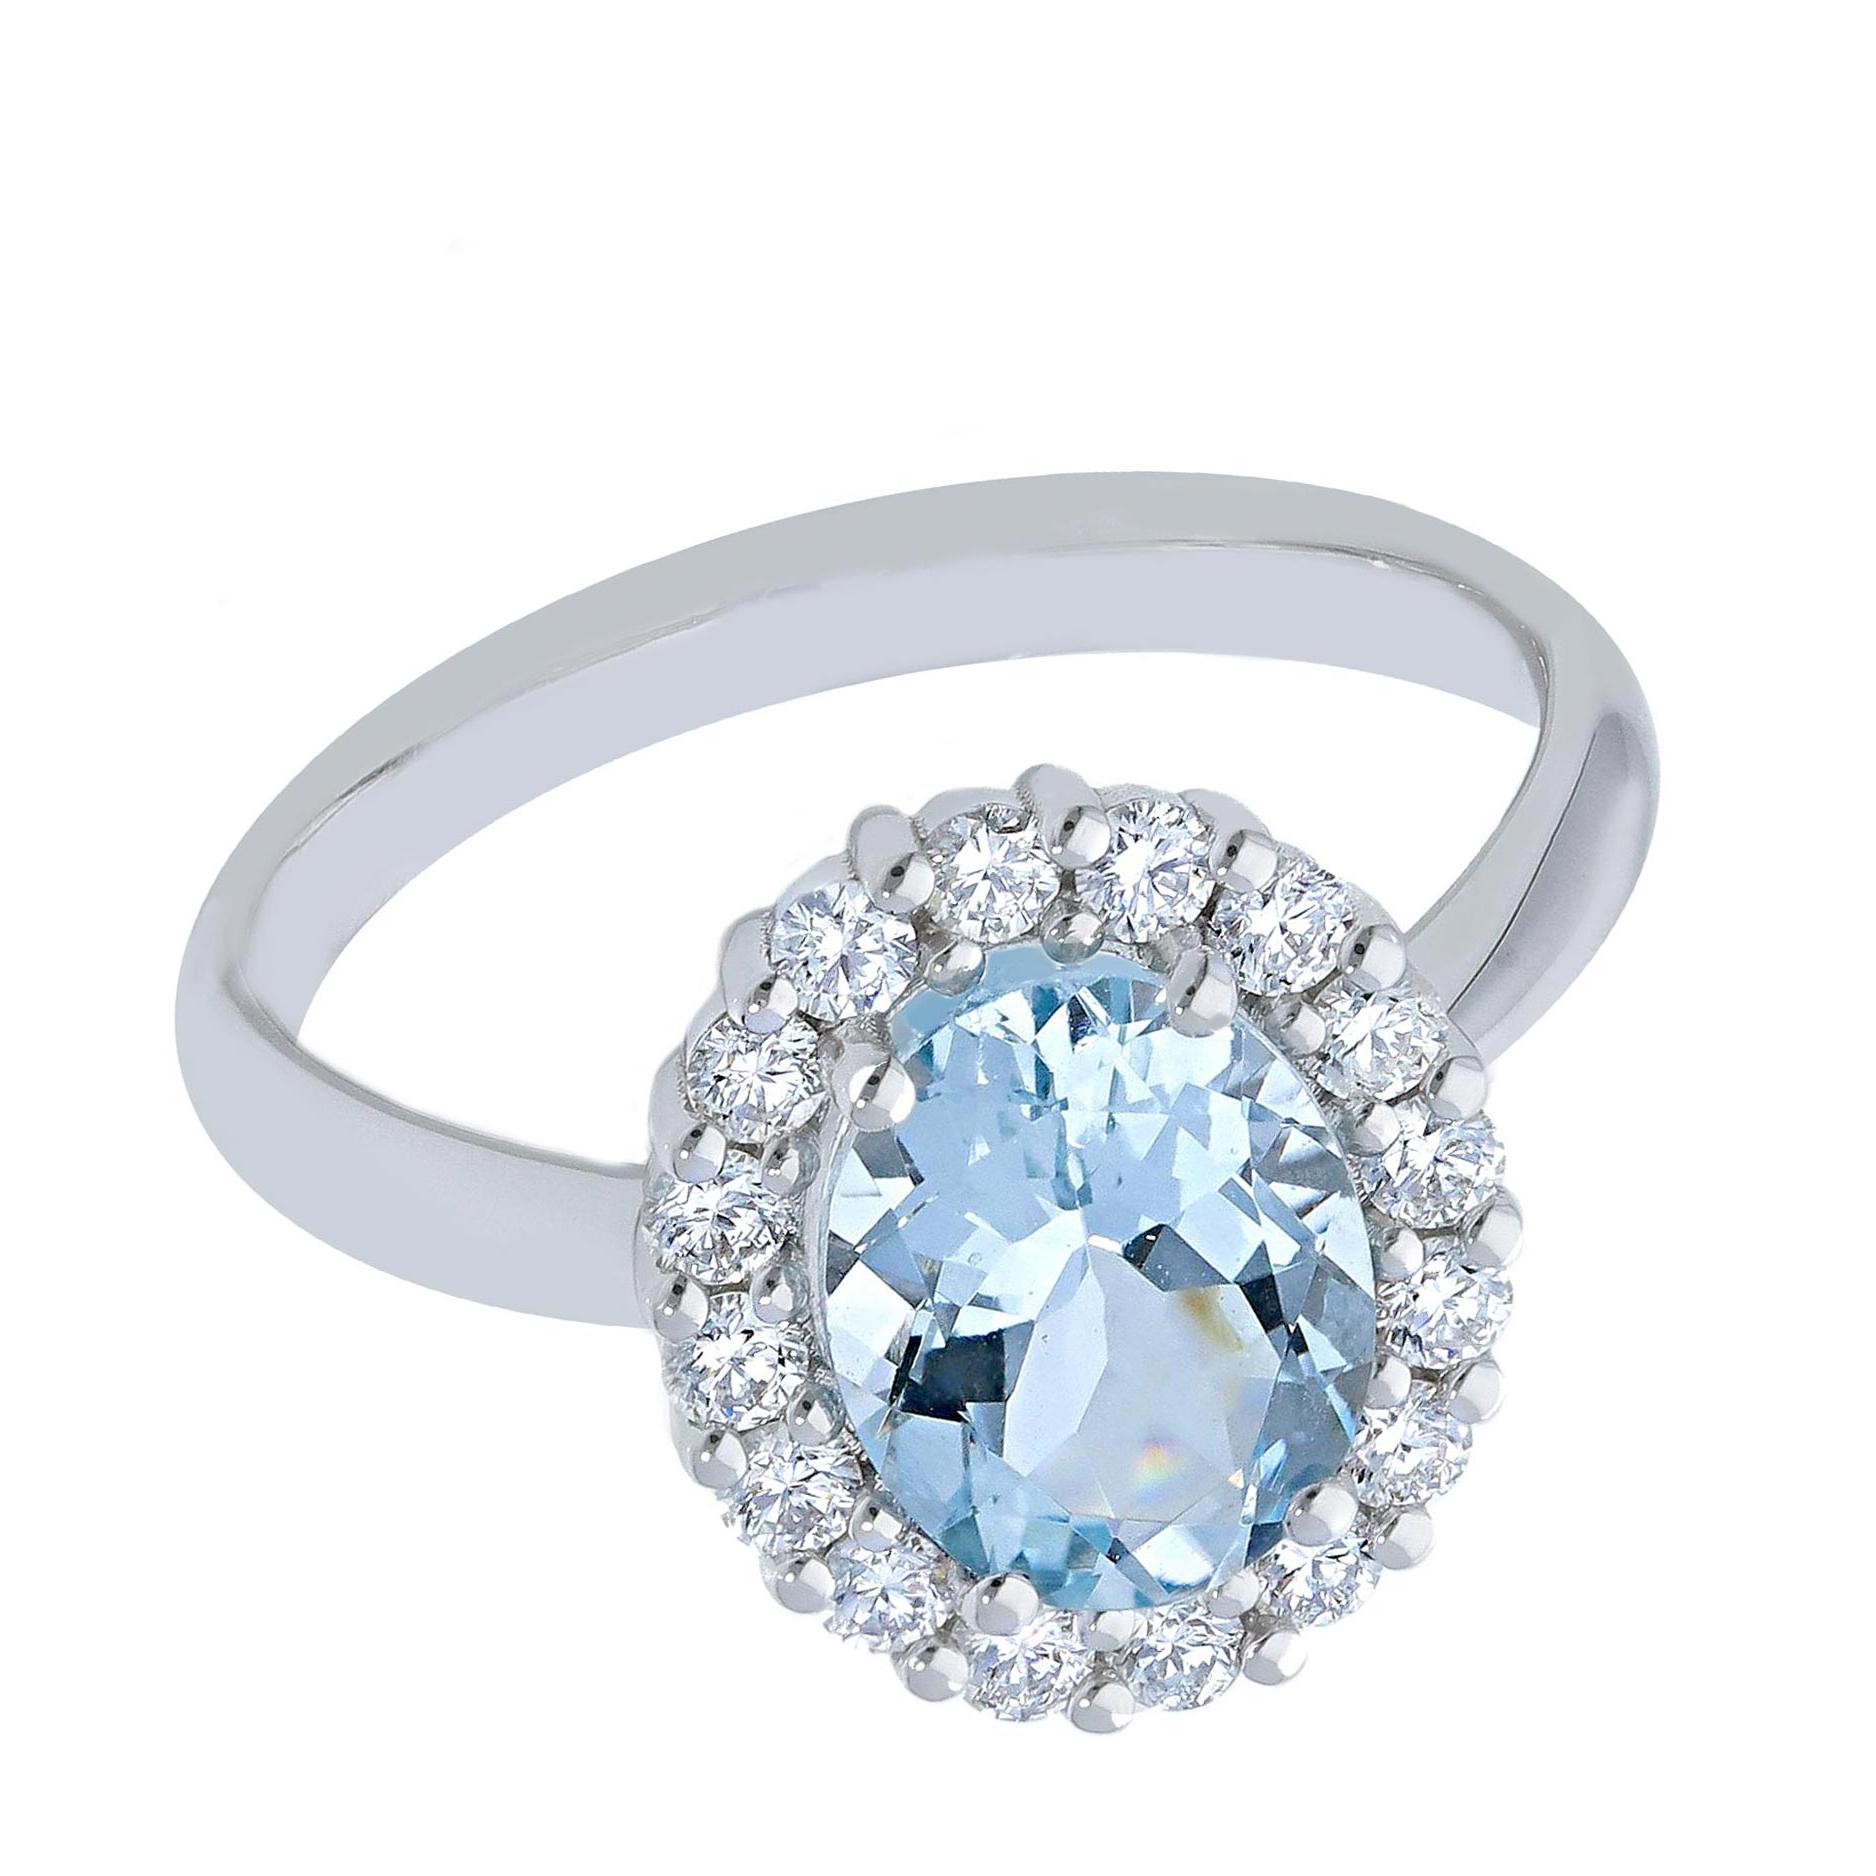 For Sale:  18K White Gold Pradera Colourful Engagement Ring with Aquamarina and Diamonds 2